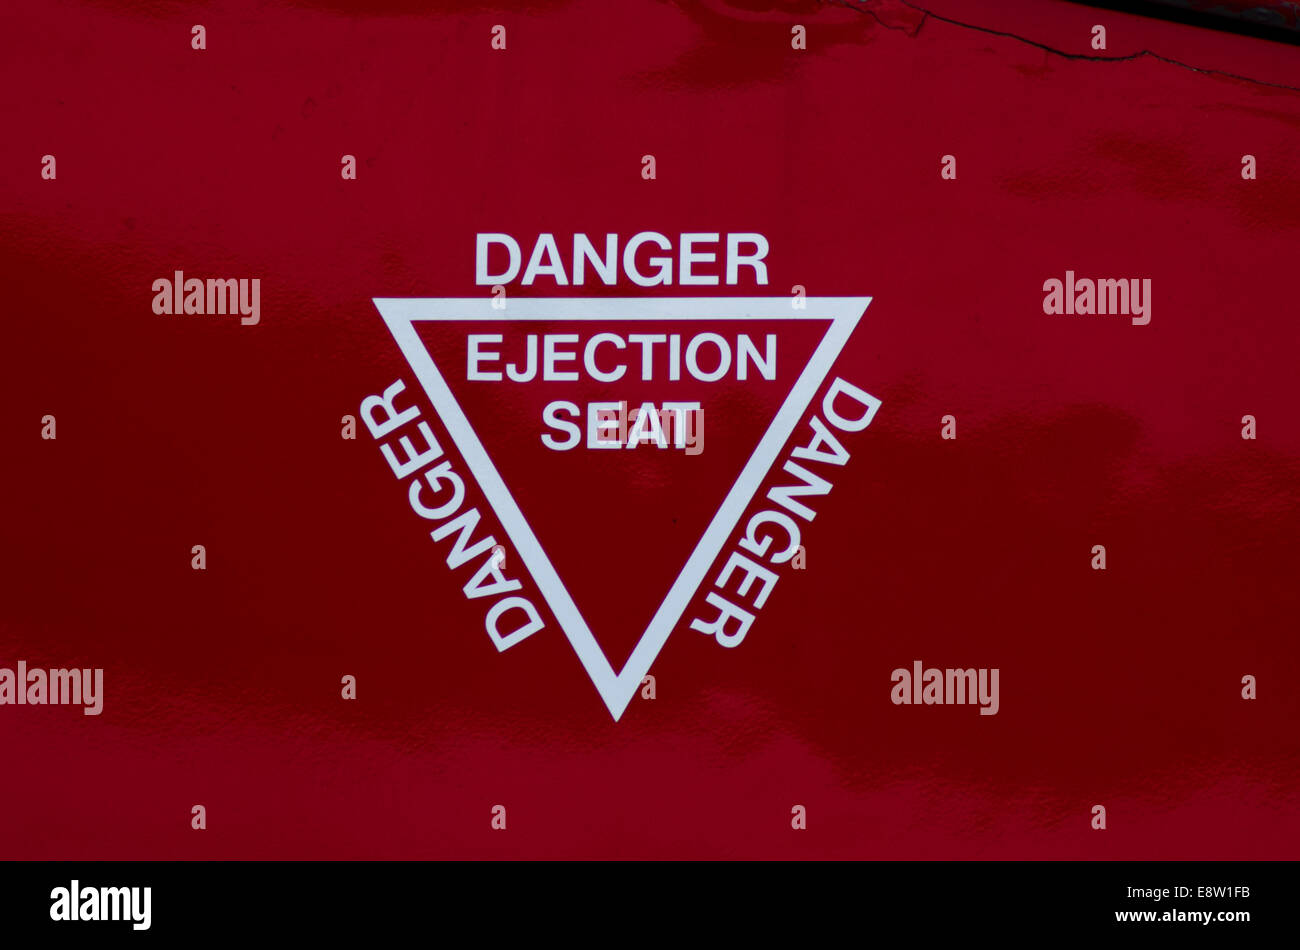 Danger Ejection Seat! Shot on the side of the fuselage of a Red Arrow plane Stock Photo